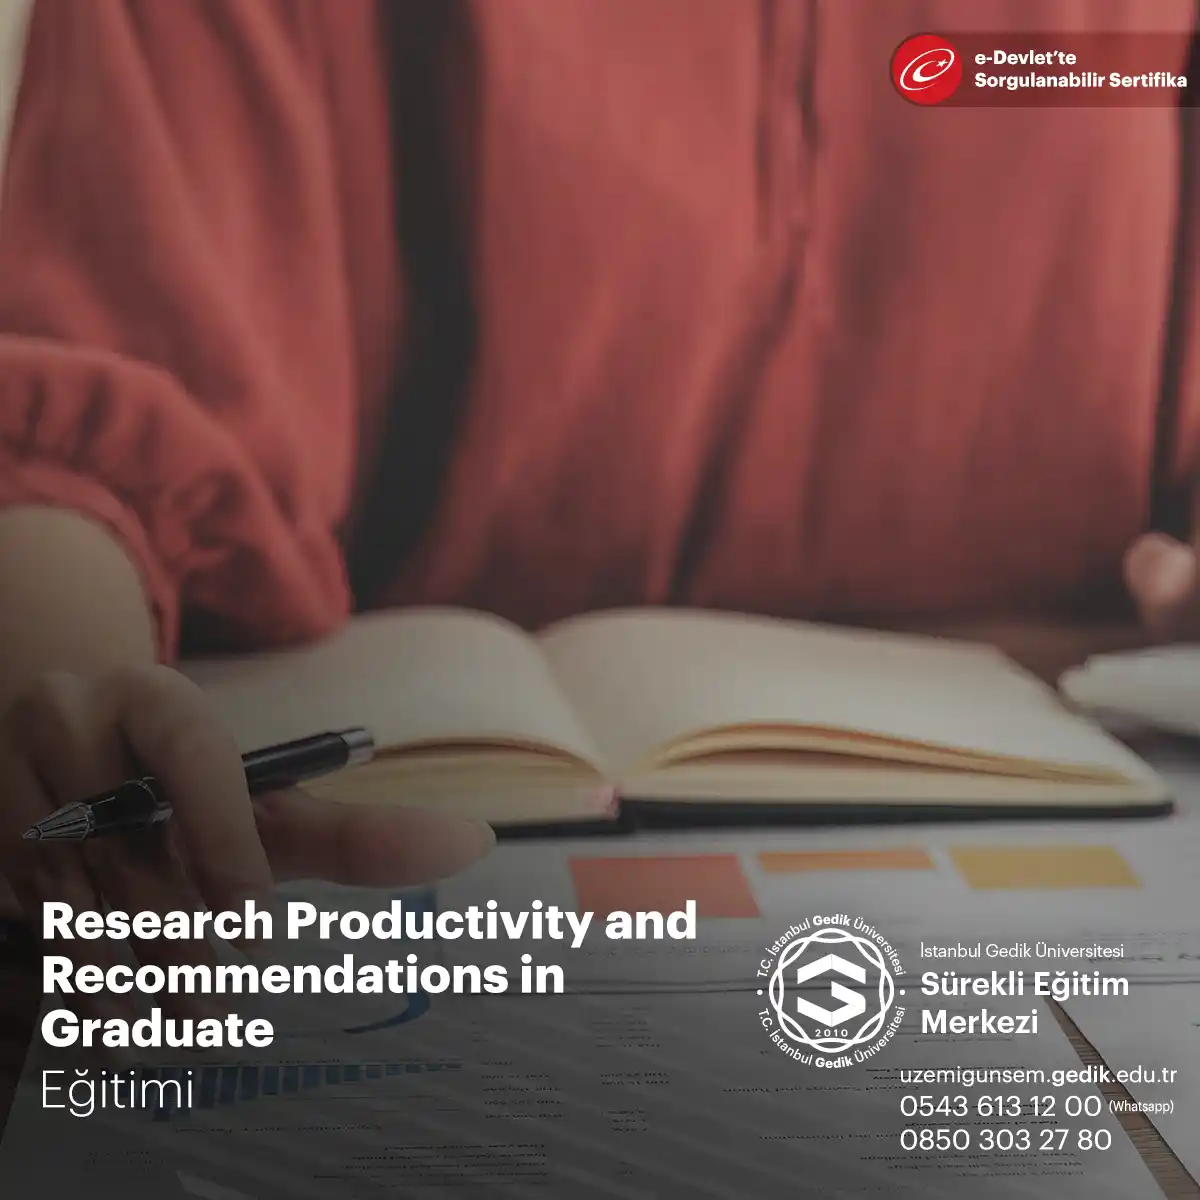 Research Productivity and Recommendations in Graduate Education